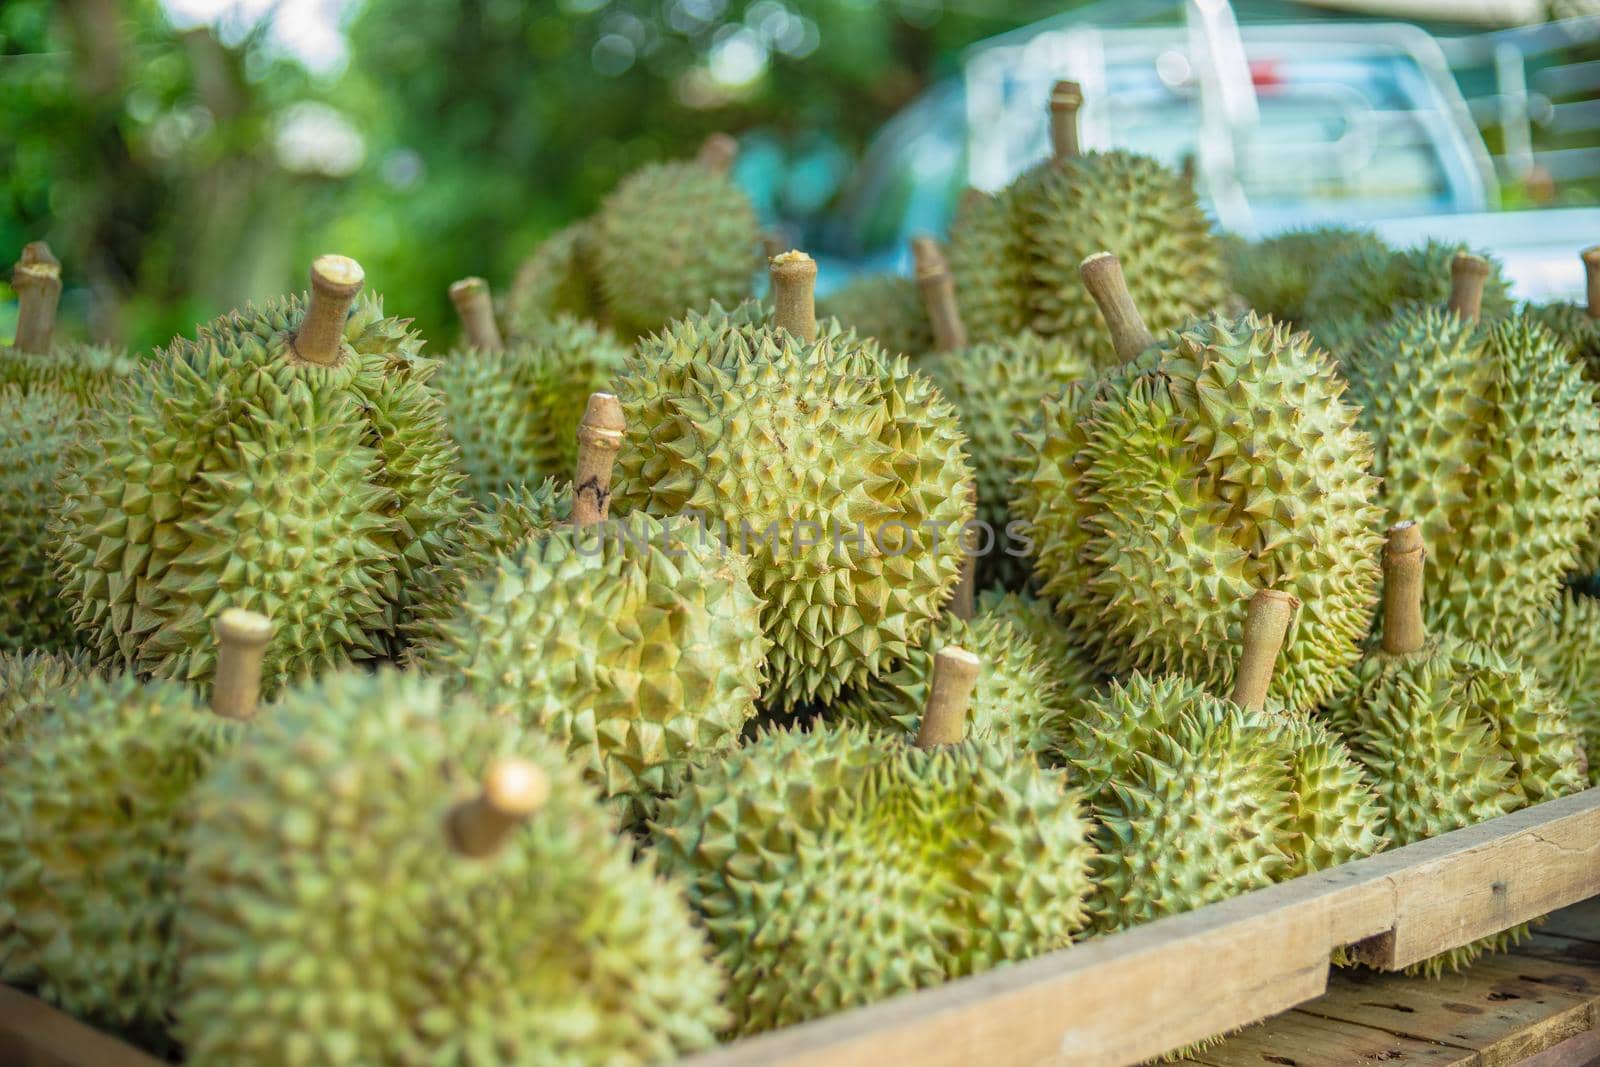 Durian has been arranged on wooden shelf to be displayed to the buyer